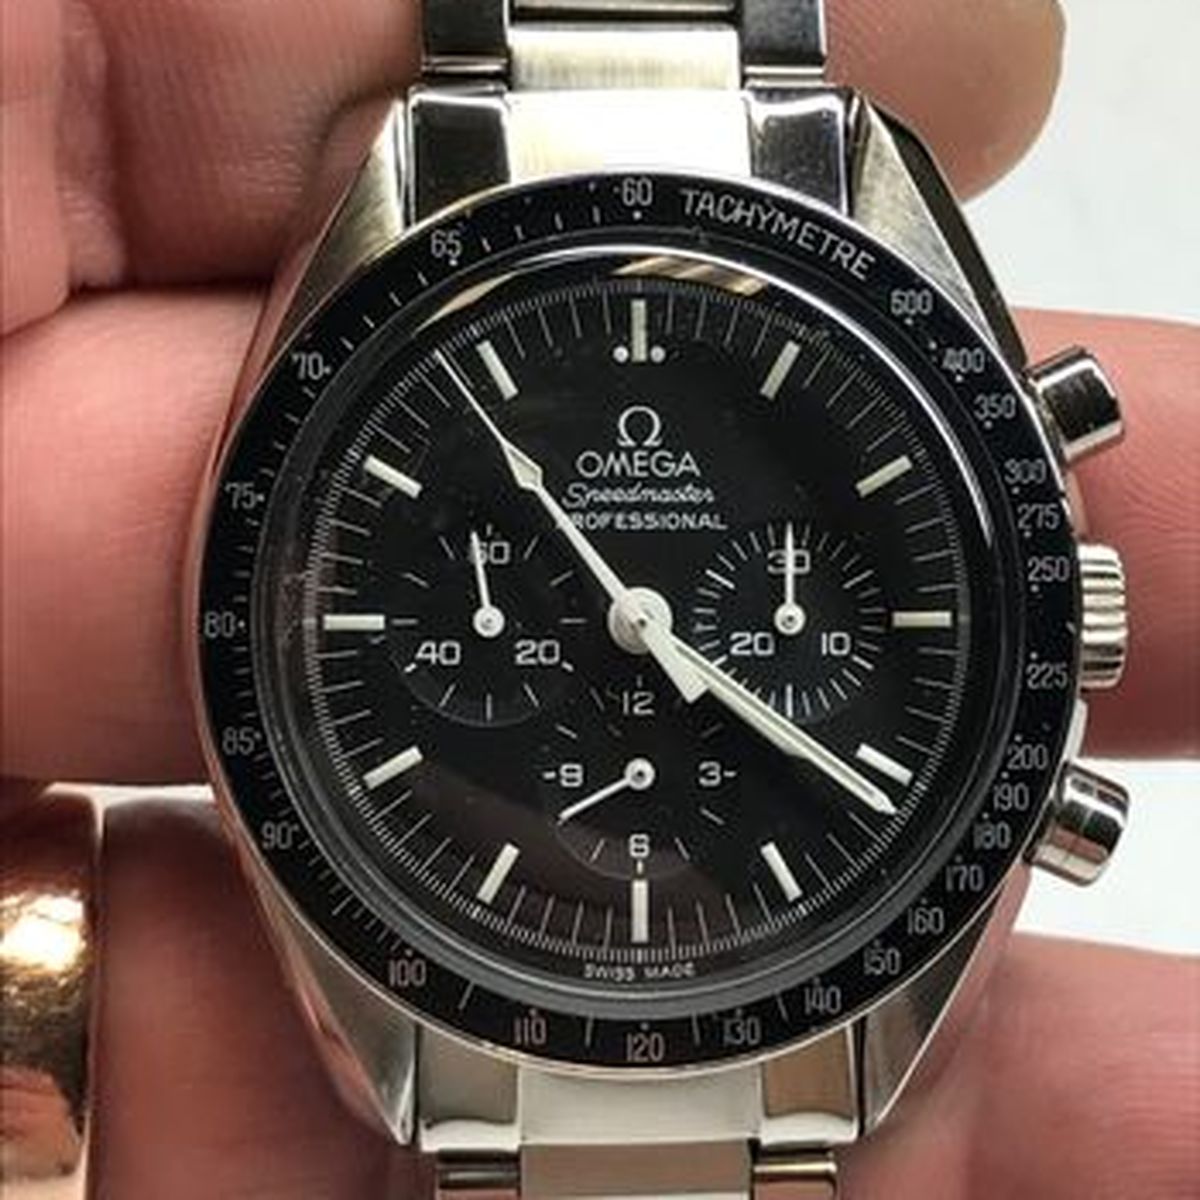 authorized omega watch repair center